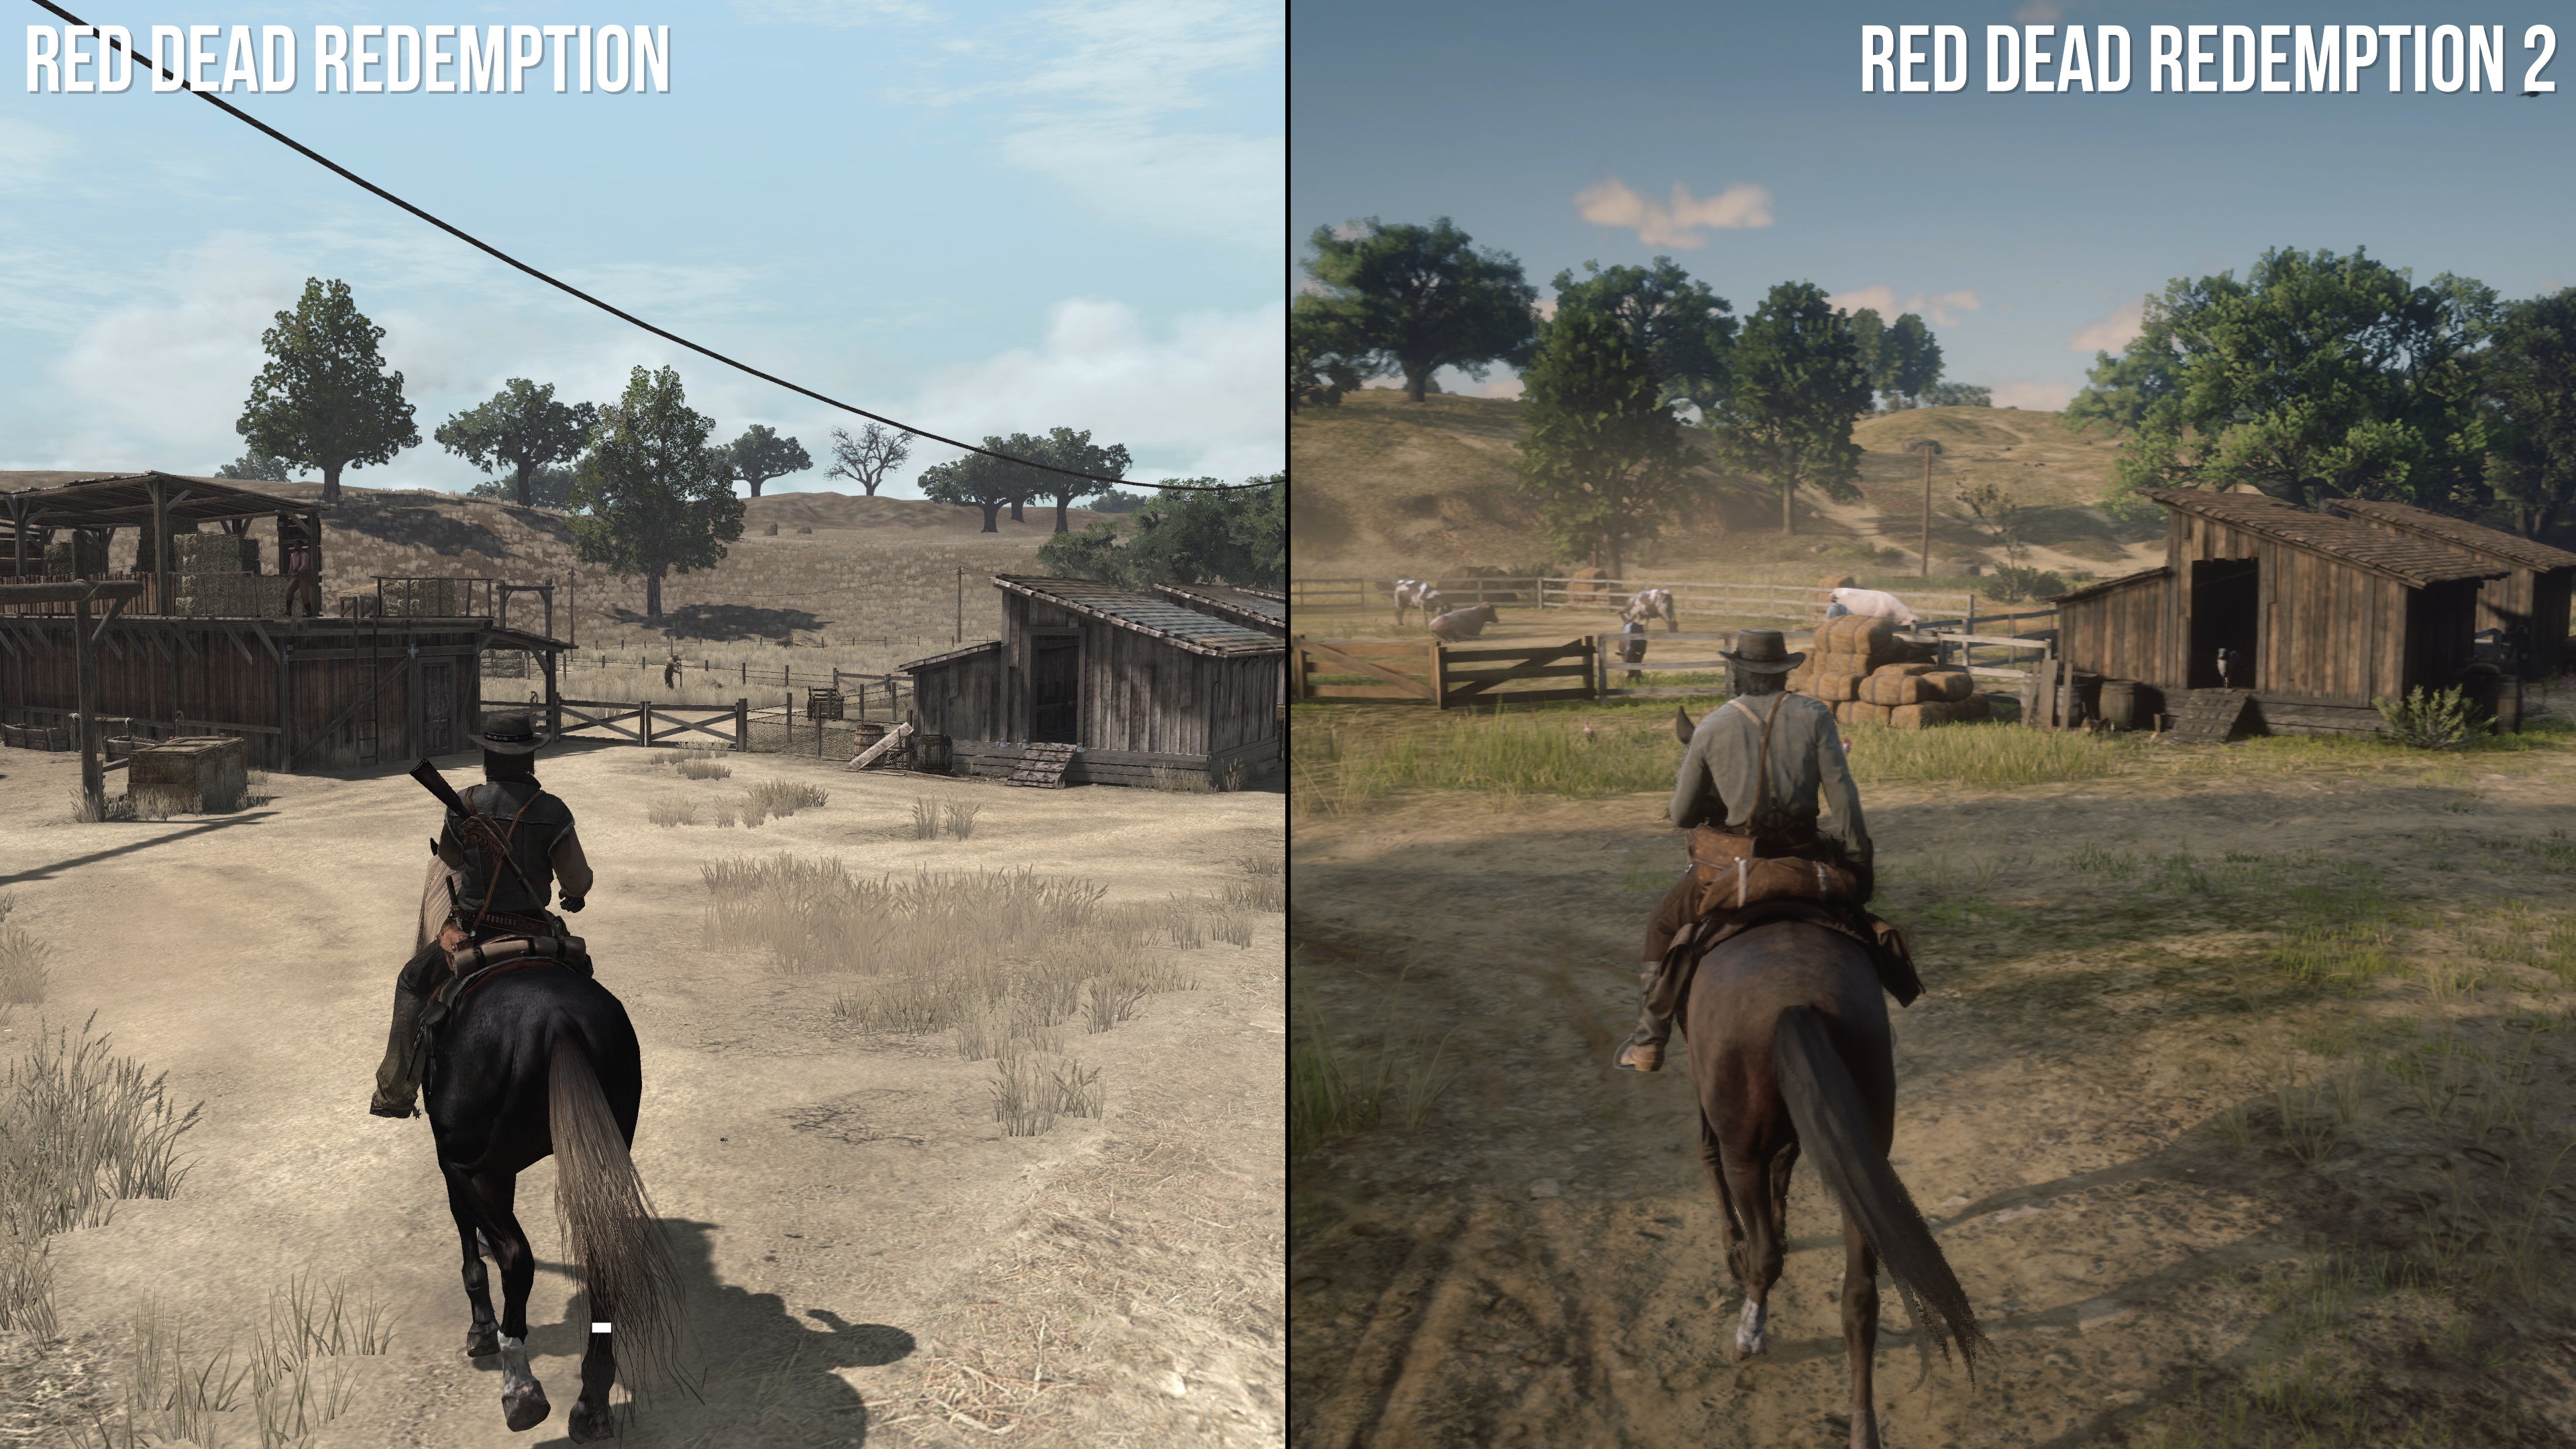 Blackwater and beyond: Red Dead Redemption 1/2 compared | Eurogamer.net